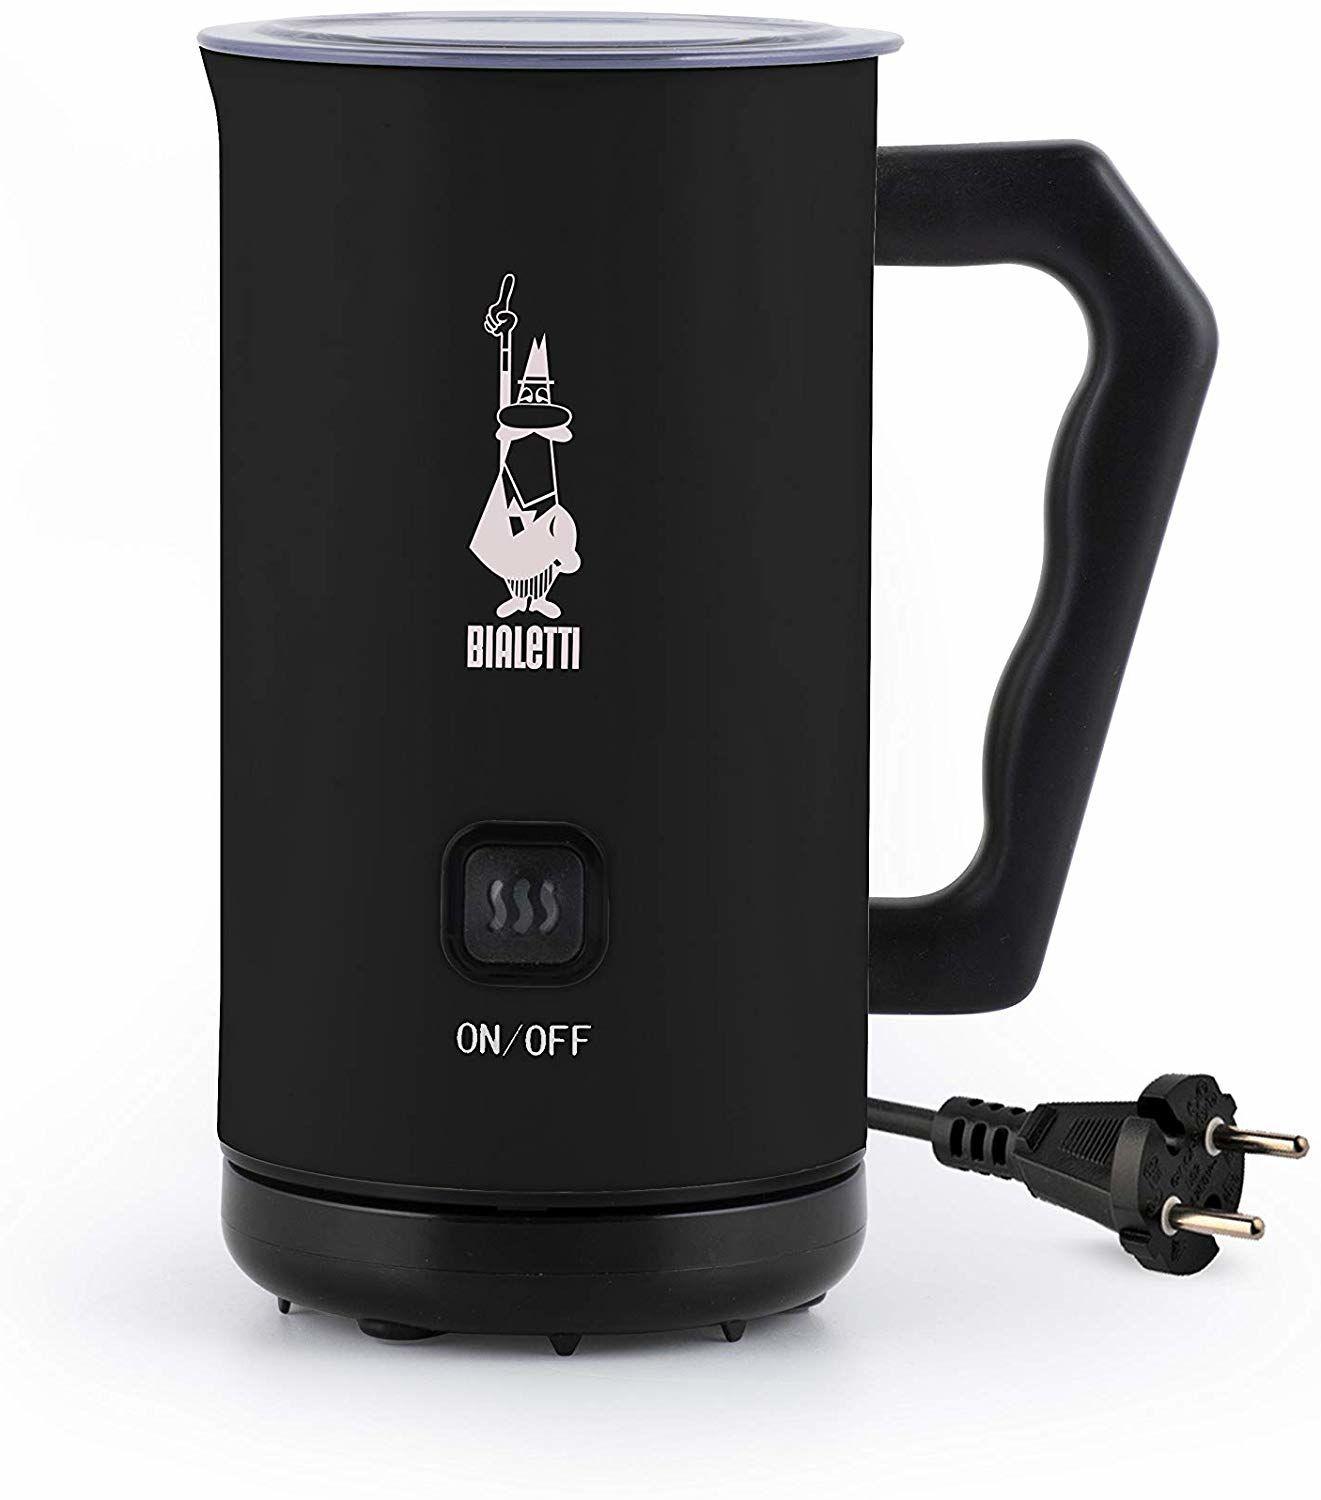 Bialetti MKF02 Automatic milk frother Black